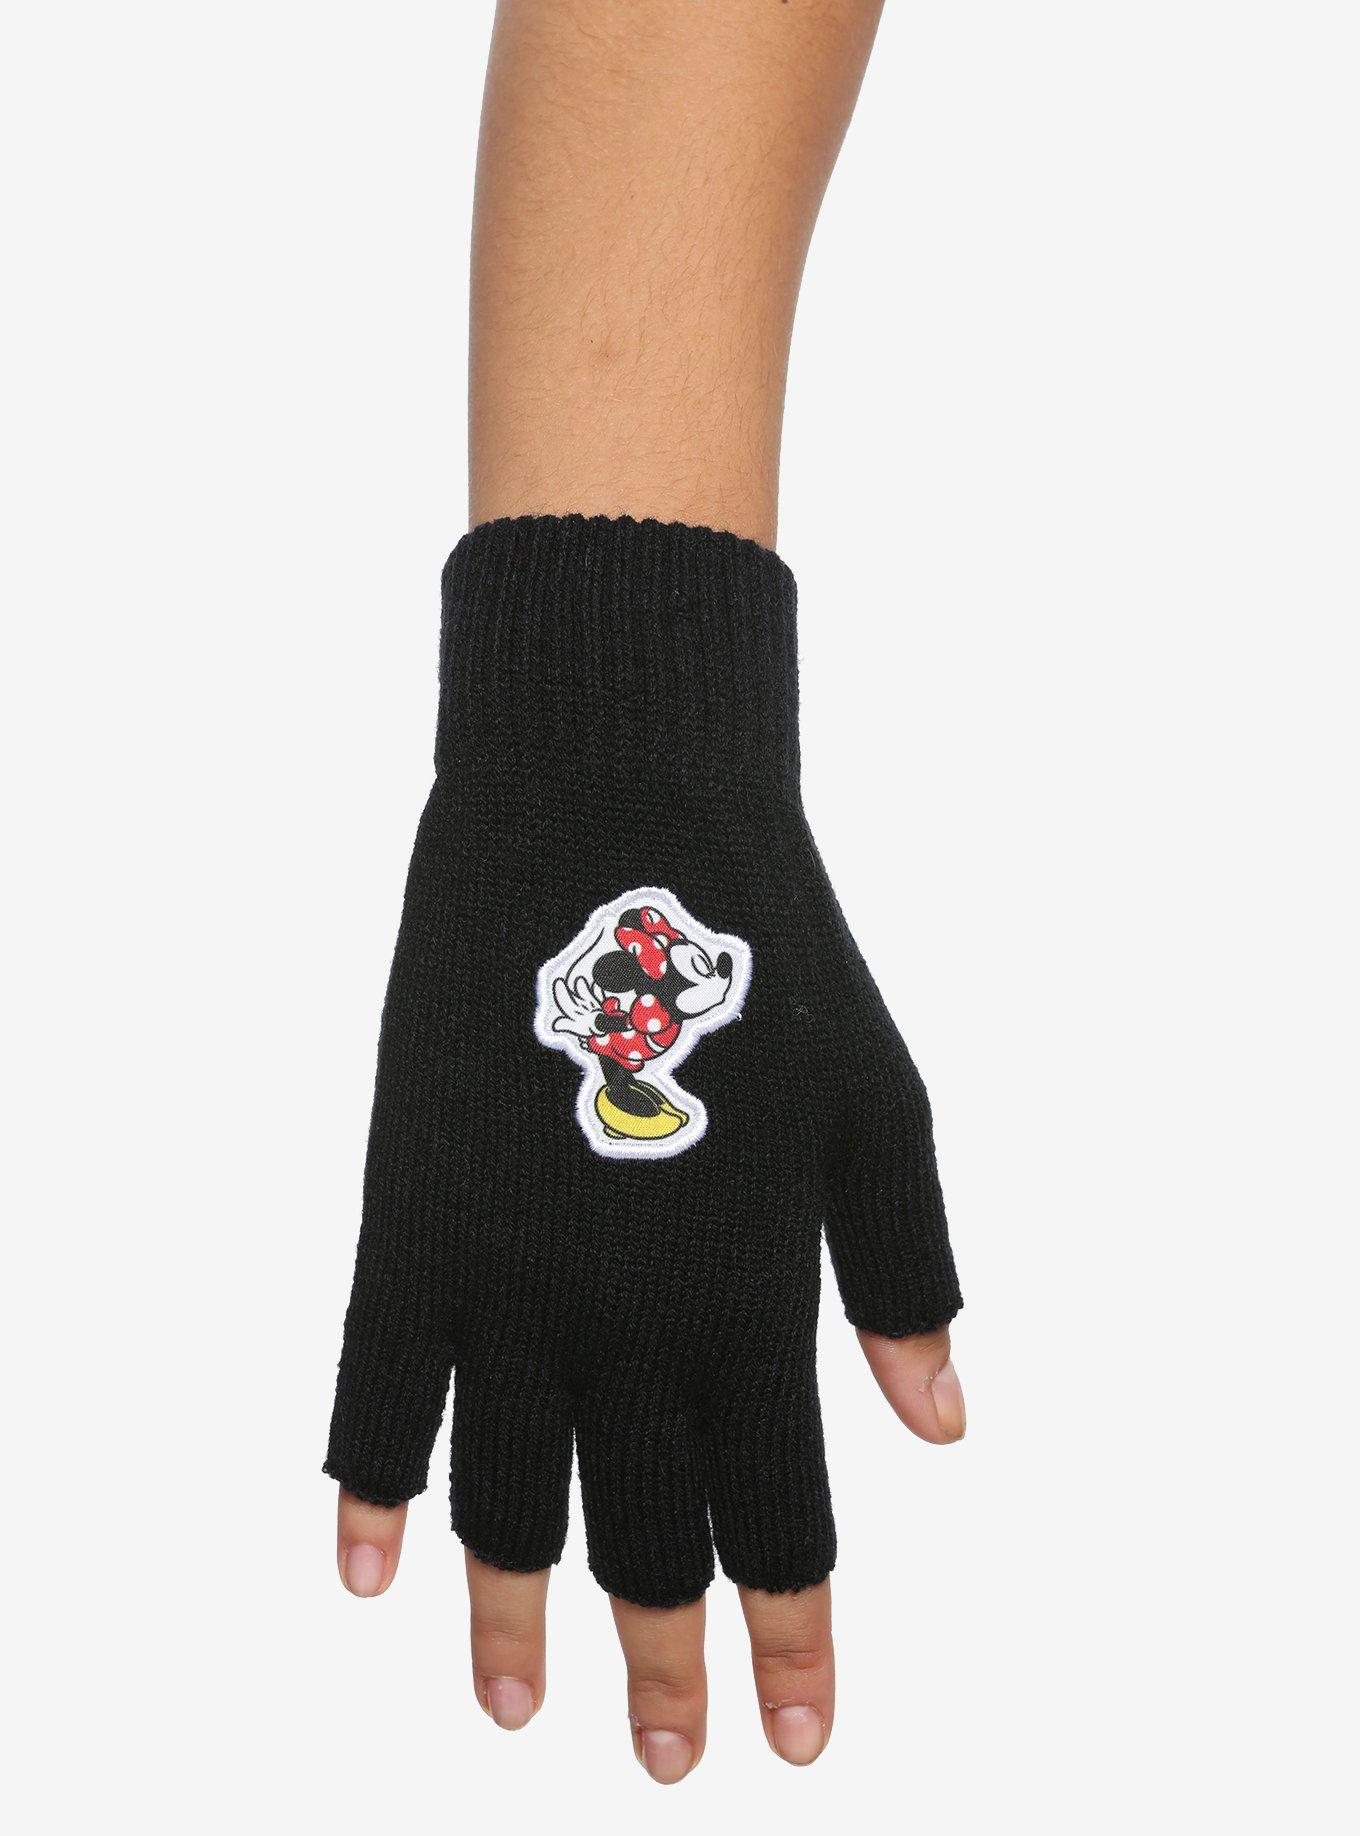 CUT-OFF FINGER GLOVES HAS ALL TIME LOW ON THEM FROM HOT TOPIC